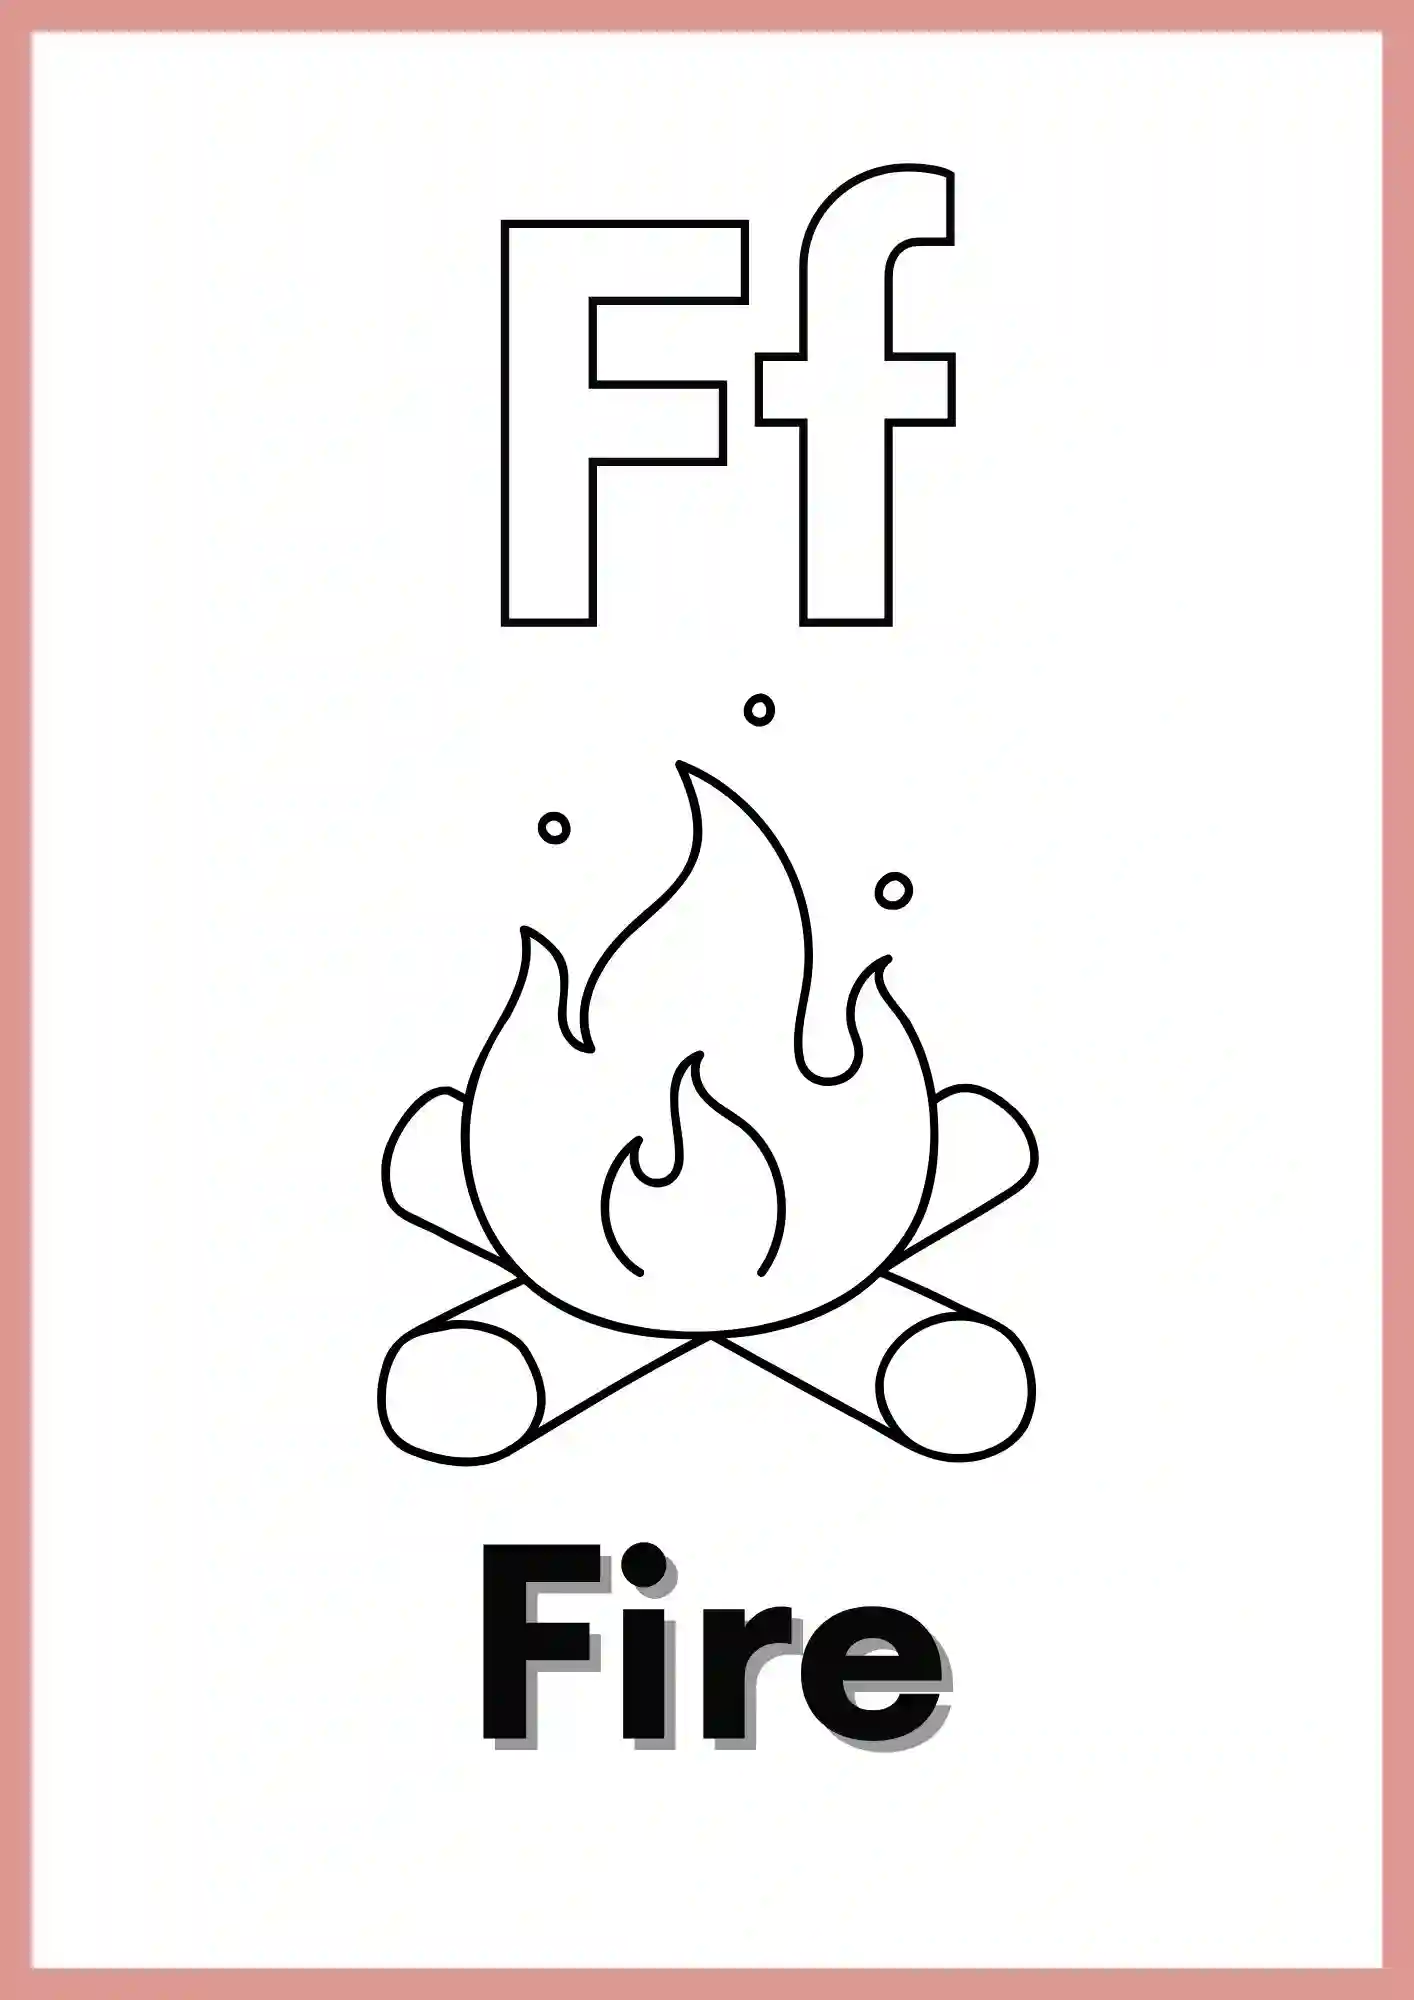 Letter F with FIRE colouring worksheet